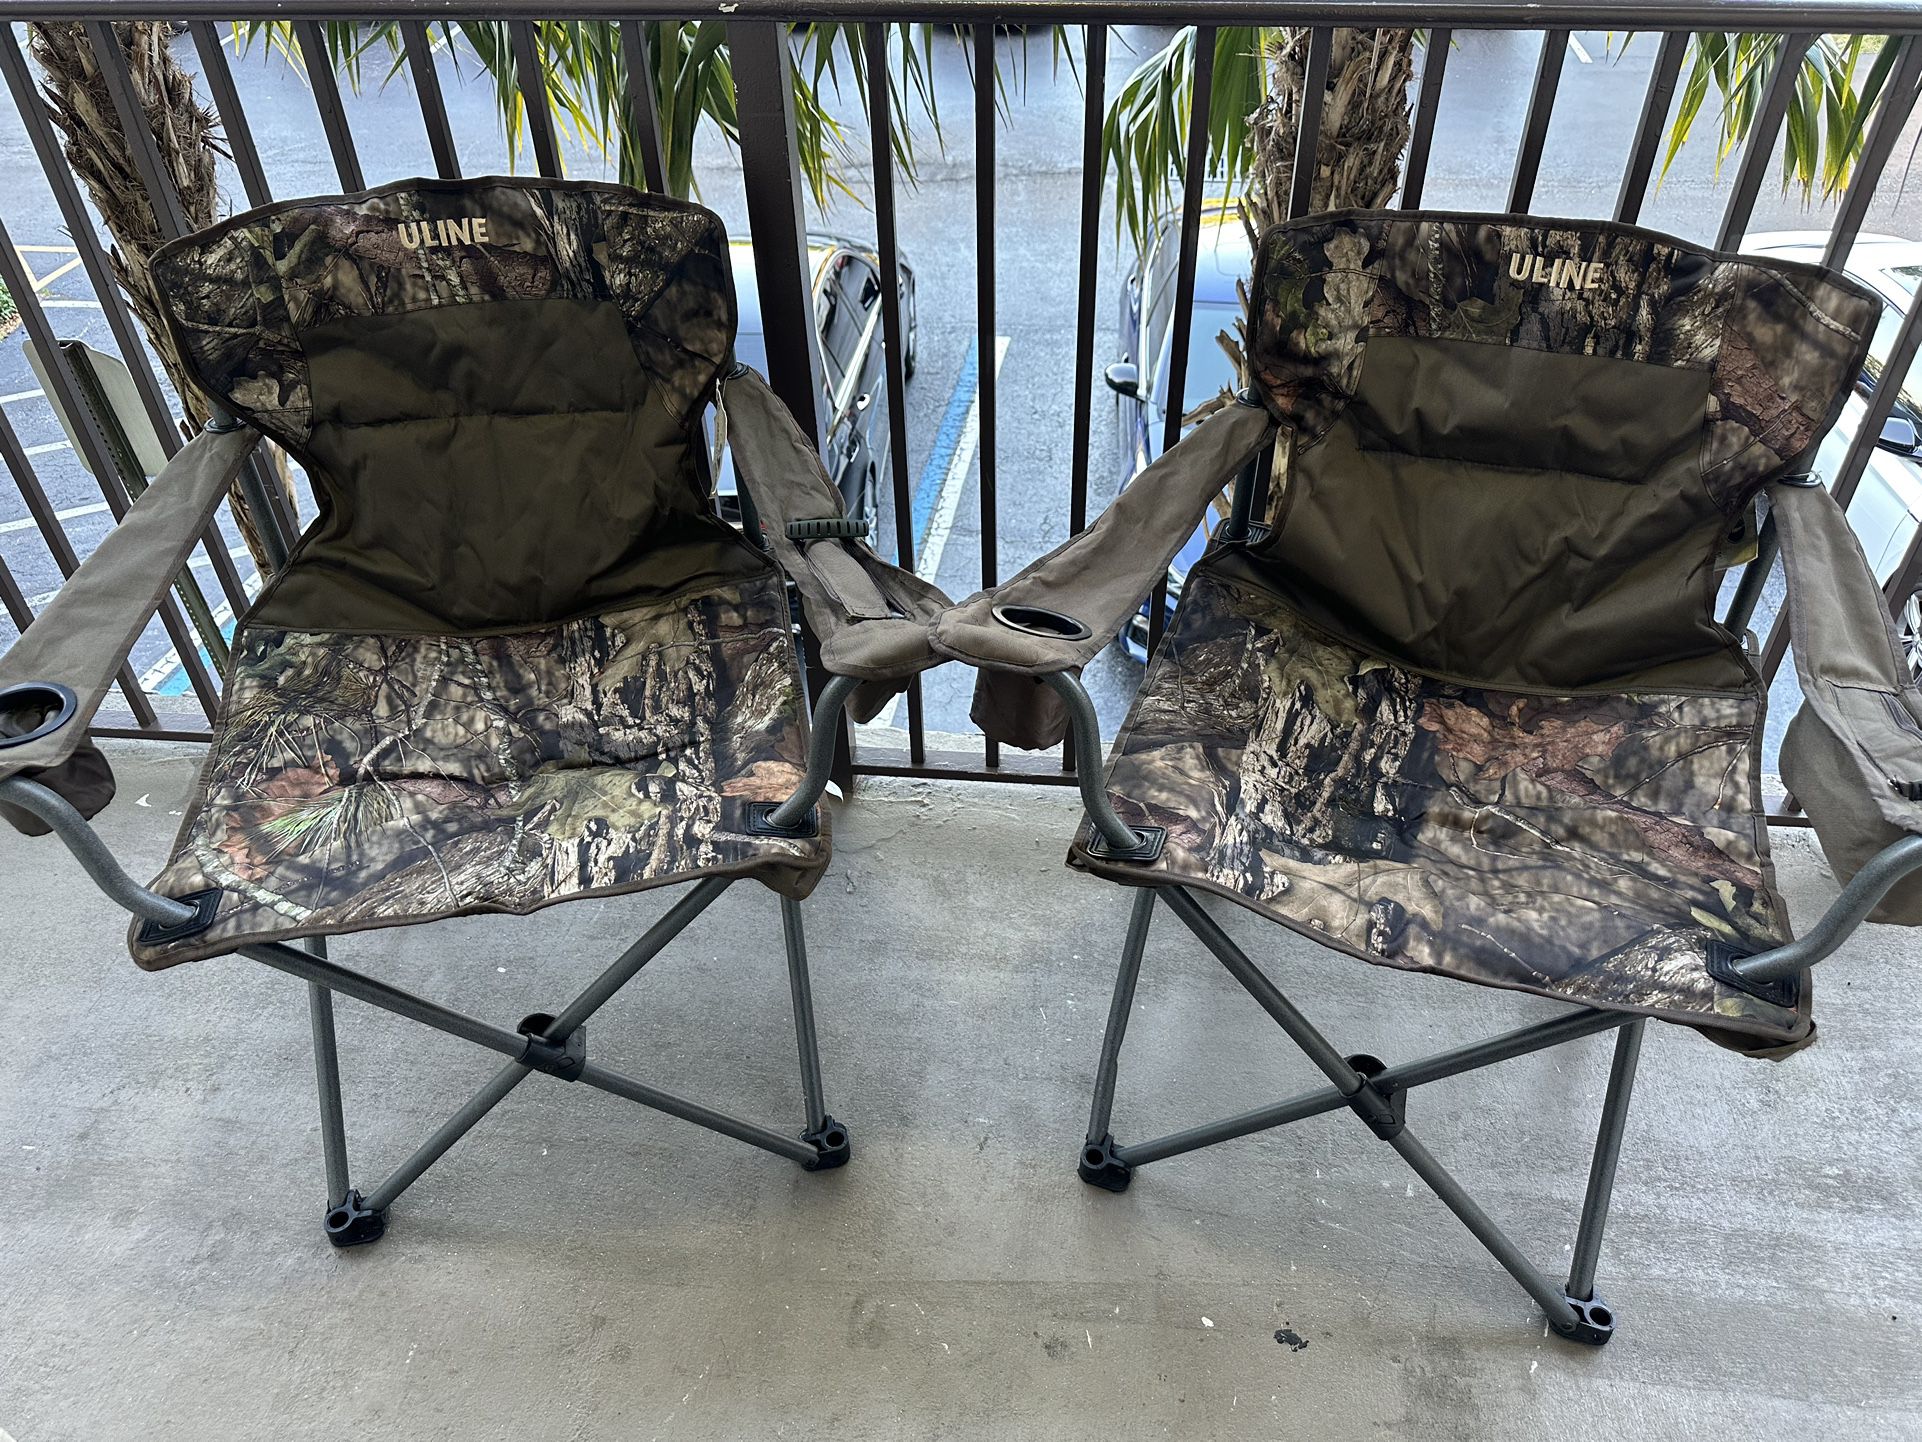 ULINE Camping Chairs